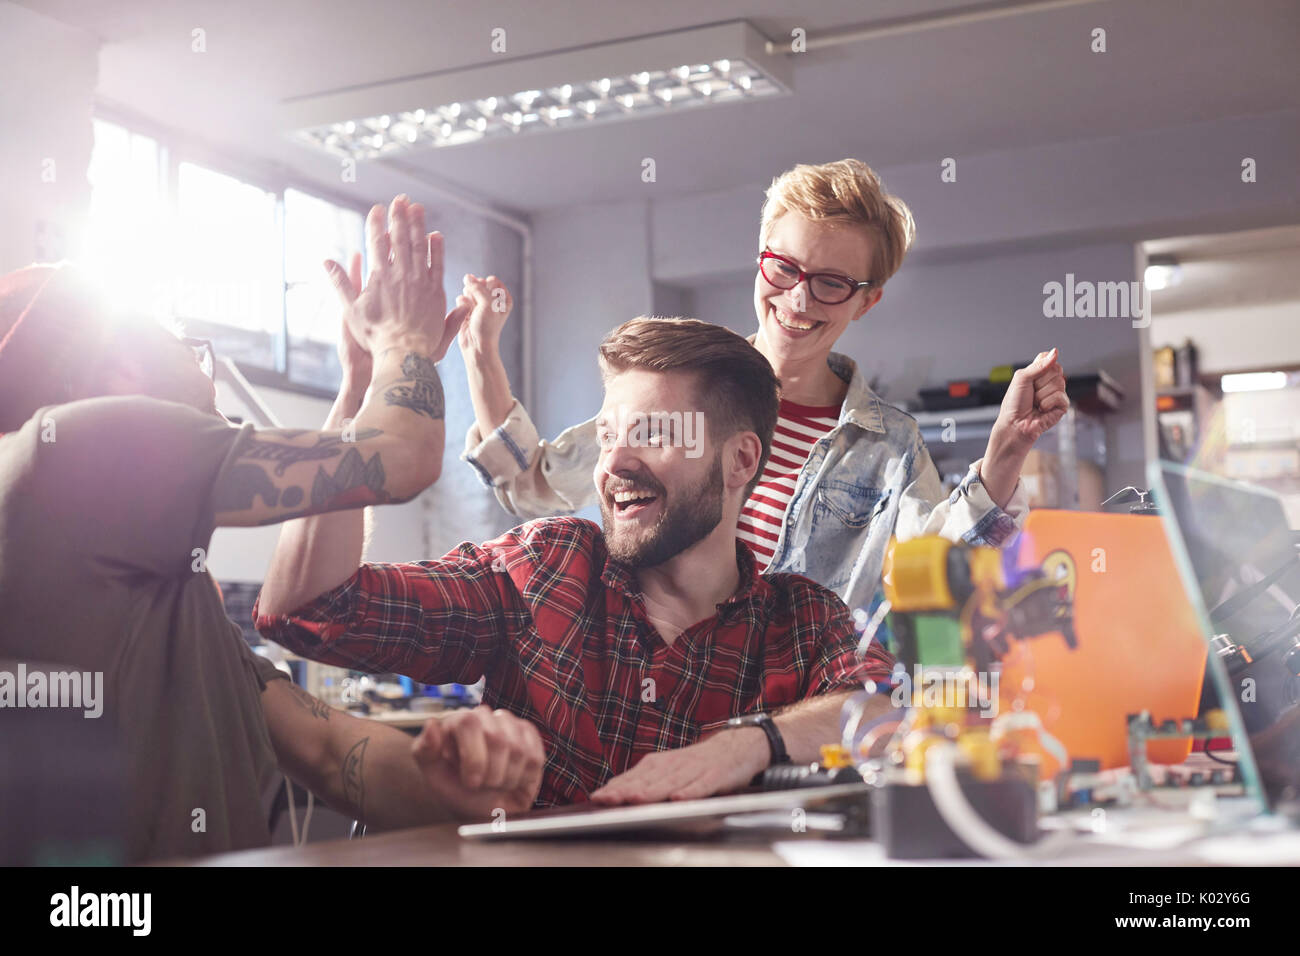 Enthusiastic designers high-fiving, celebrating in workshop Stock Photo